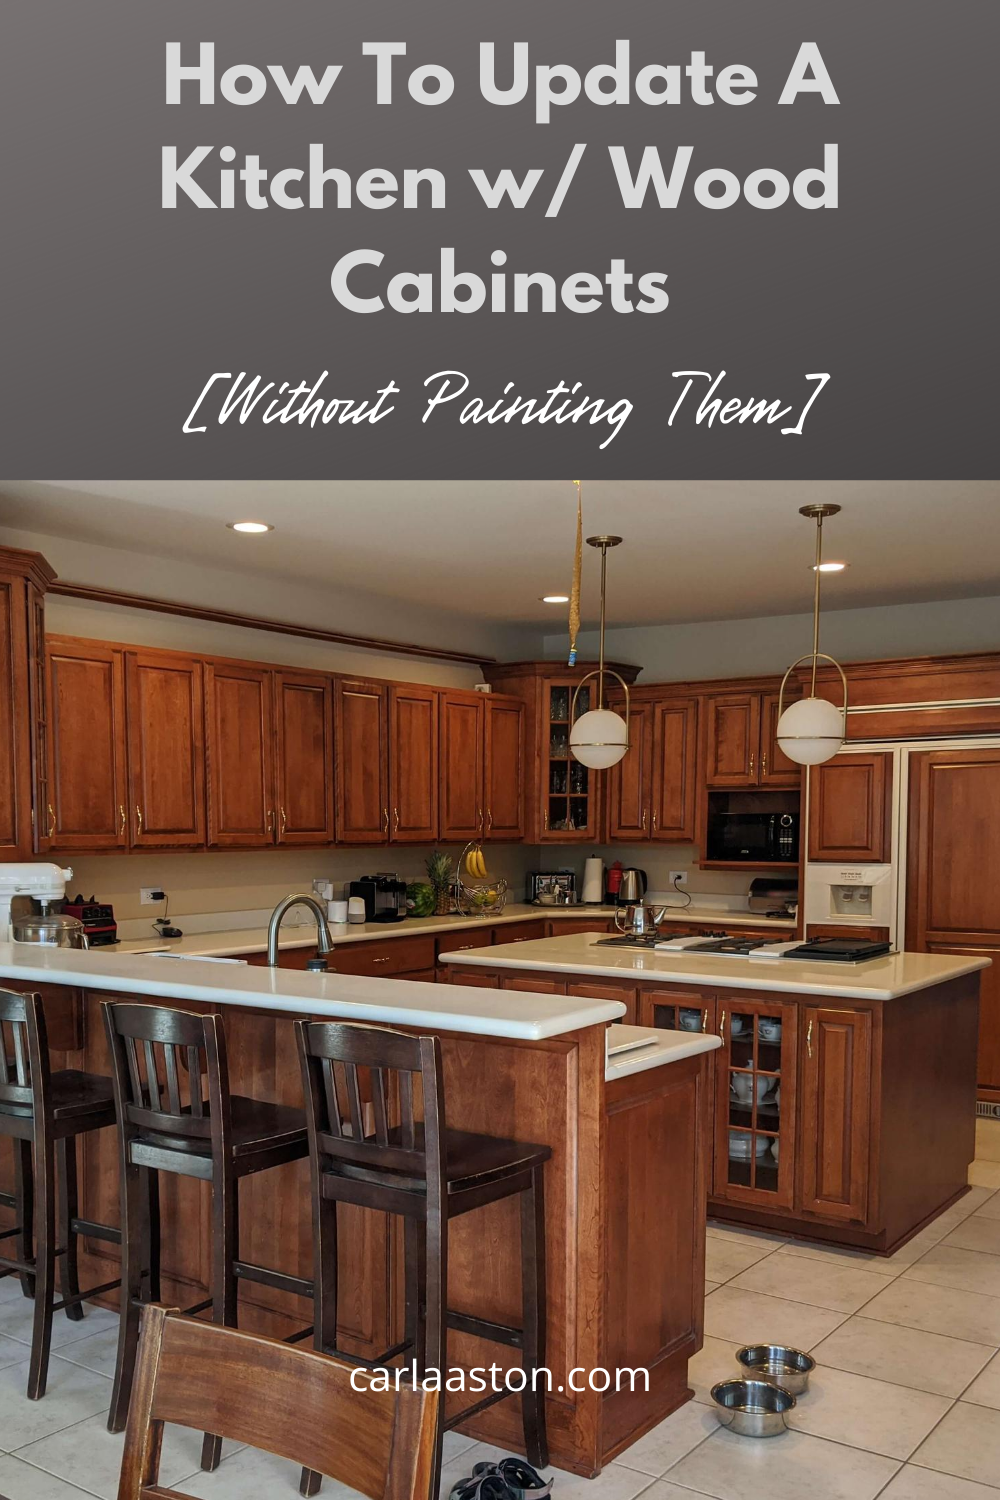 How To Update A Kitchen With Wood Cabinets Without Painting Them Designed